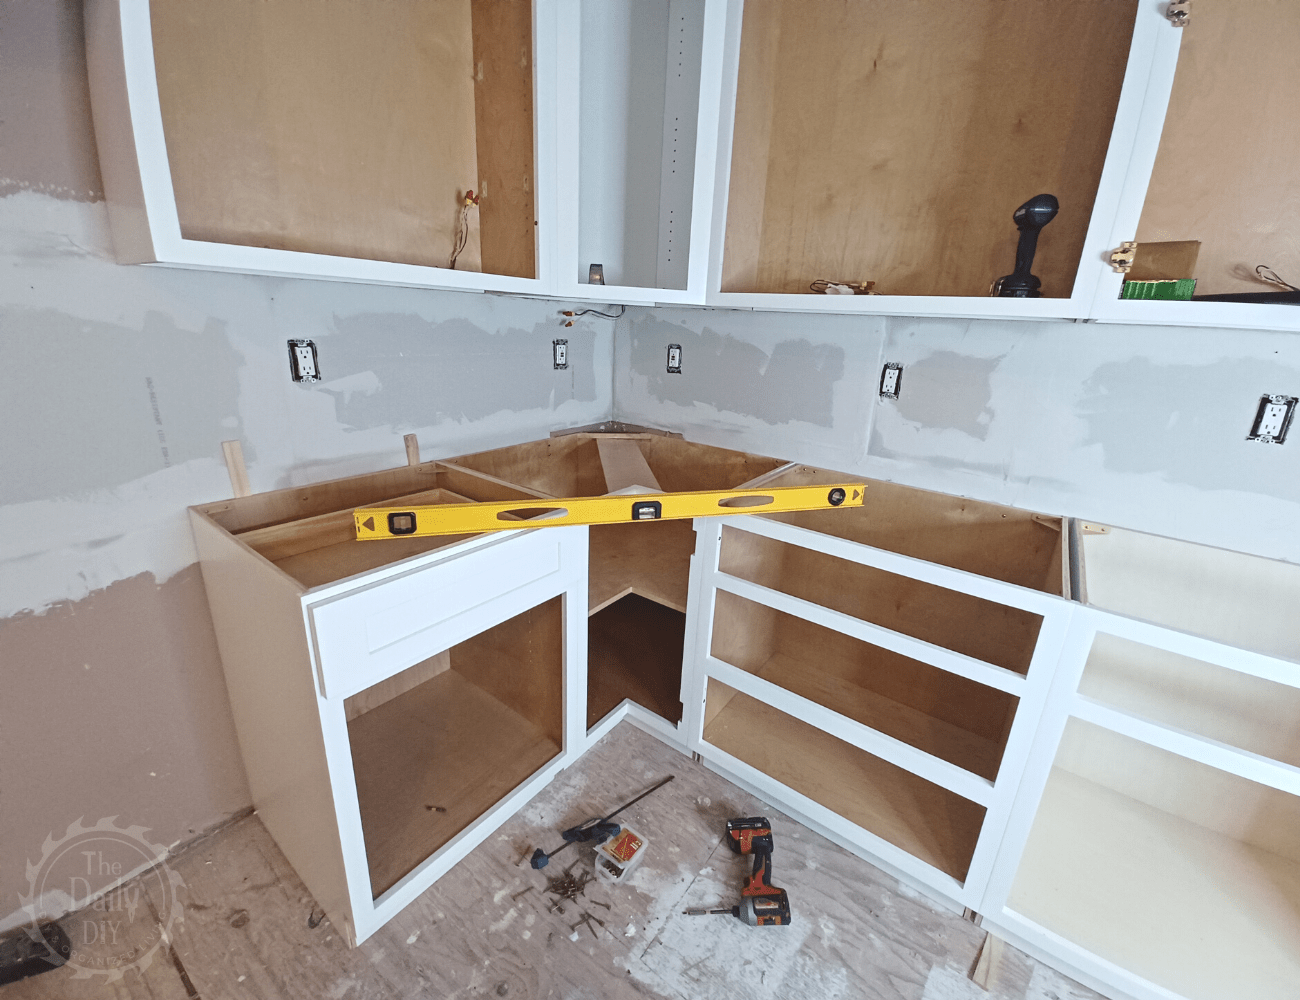 Rta Cabinets Plywood Construction | Cabinets Matttroy